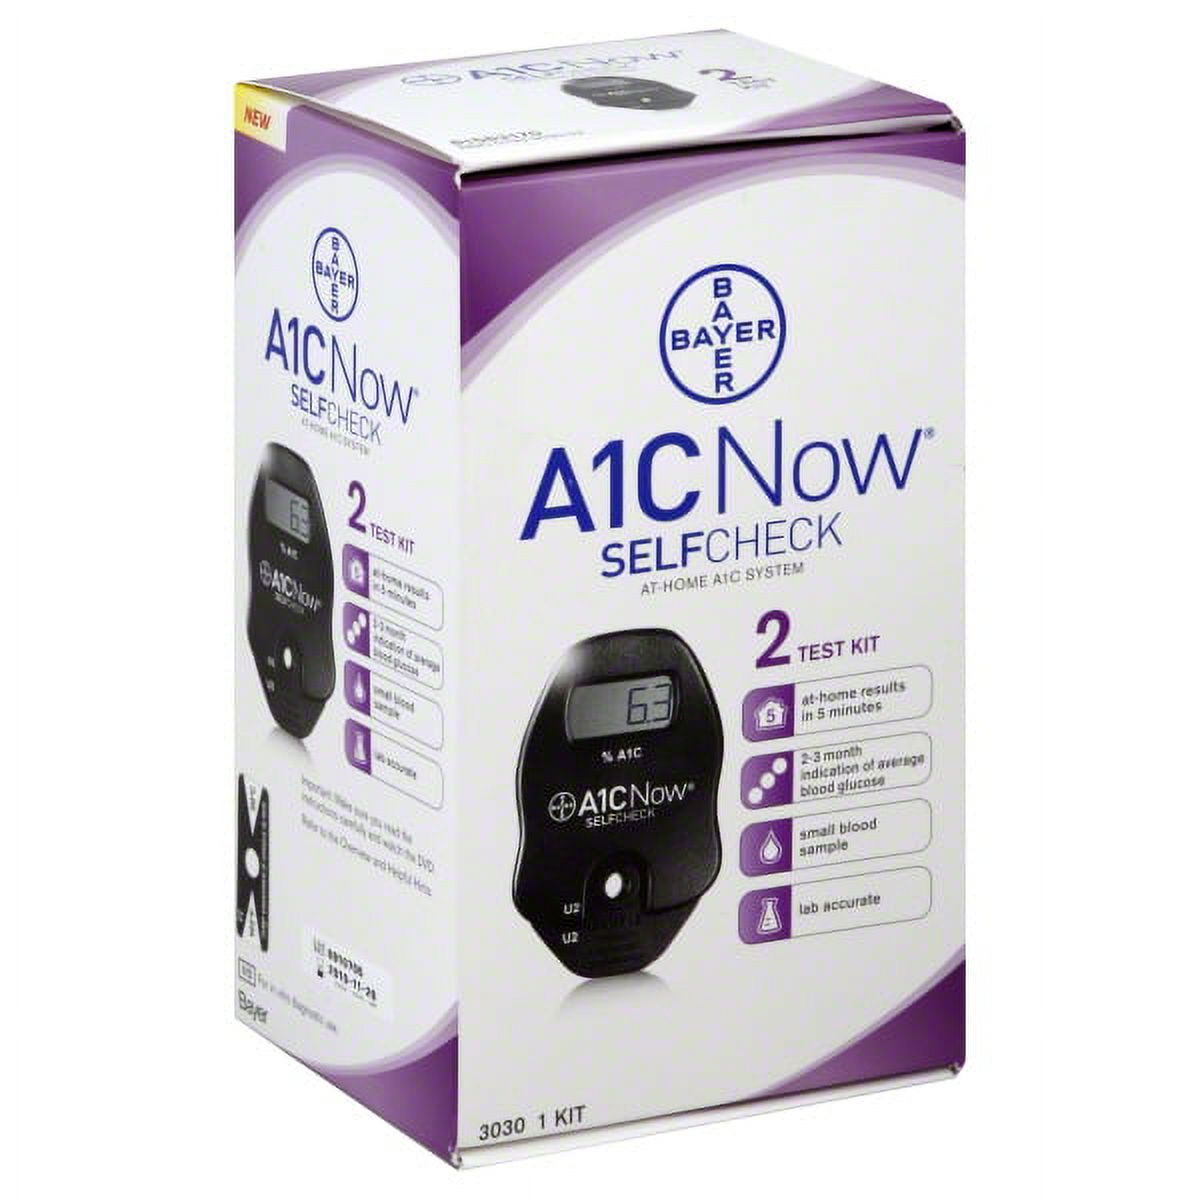 A1CNOW Self Check (2 Count Test) - image 1 of 4